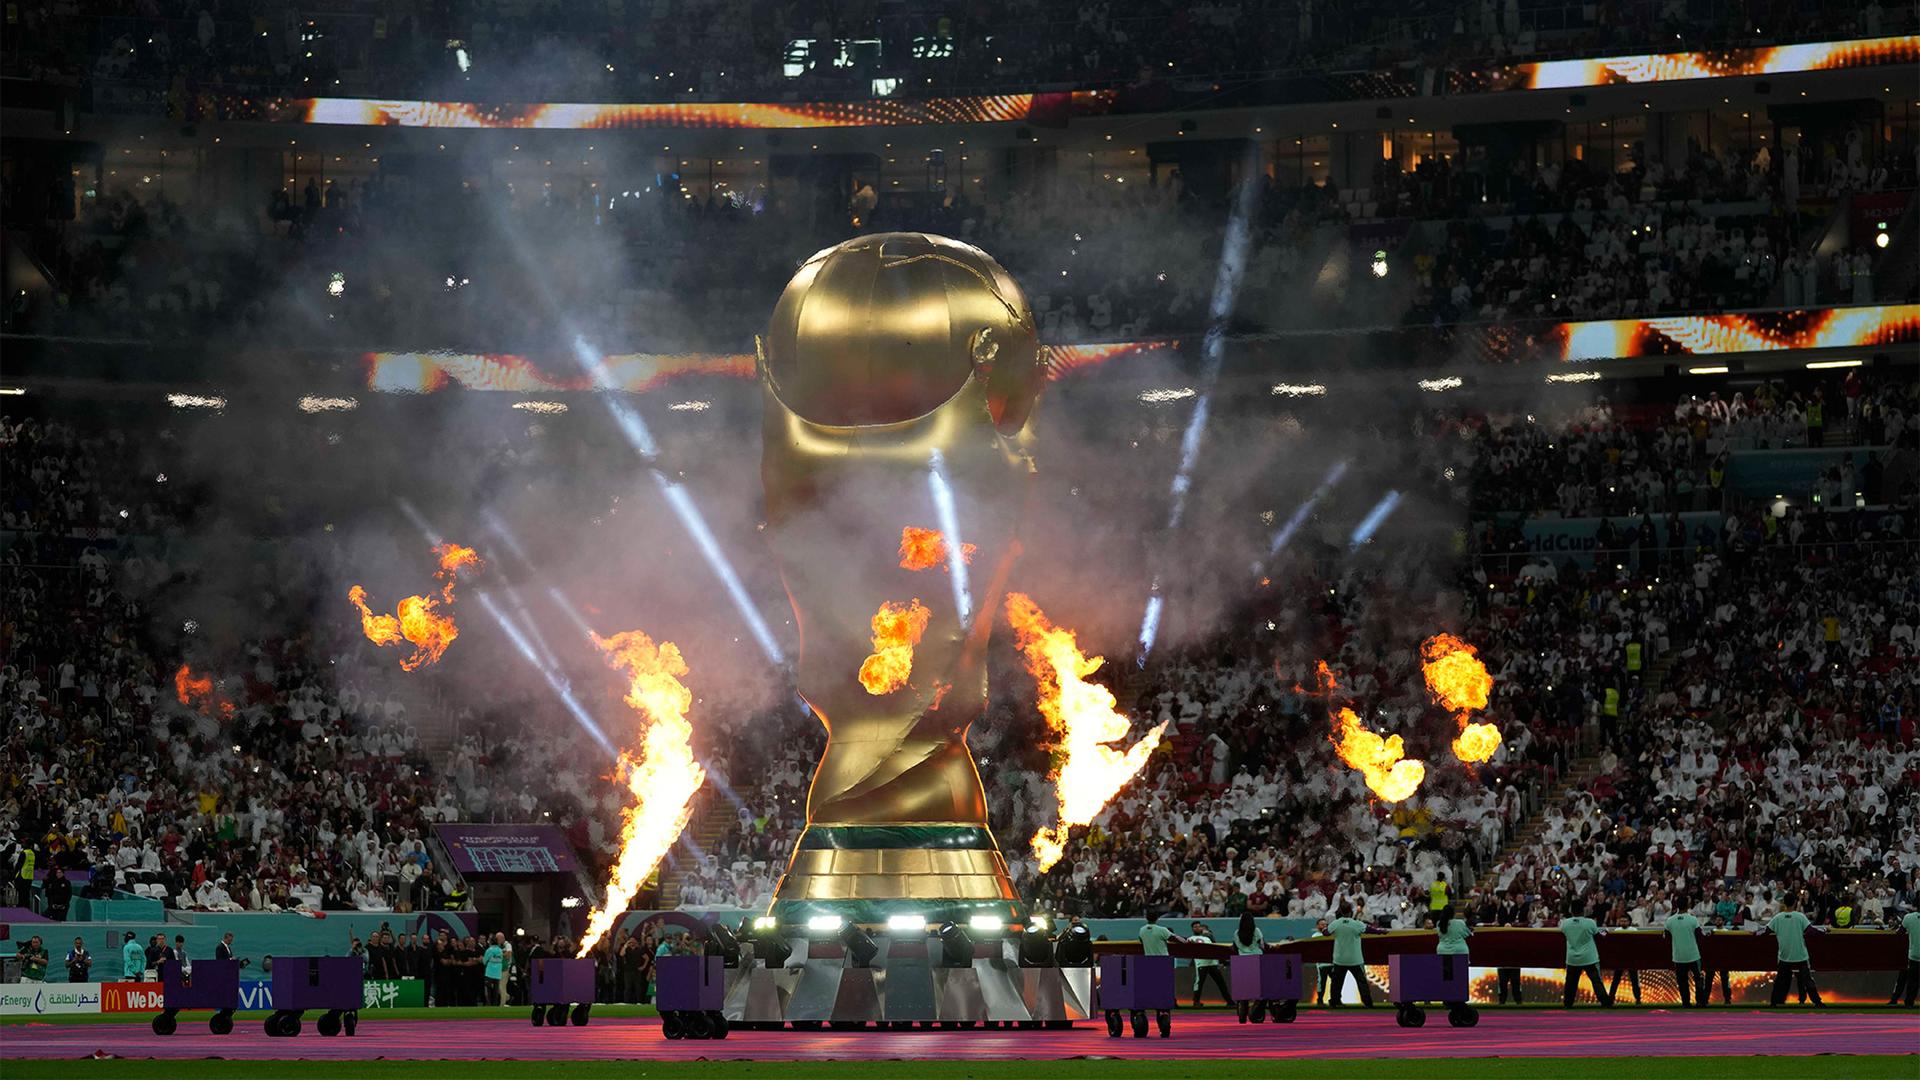 A giant inflatable copy of the trophy is displayed prior to the start of the World Cup group A soccer match between Qatar and Ecuador at the Al Bayt Stadium in Al Khor, Qatar, Nov. 20, 2022.